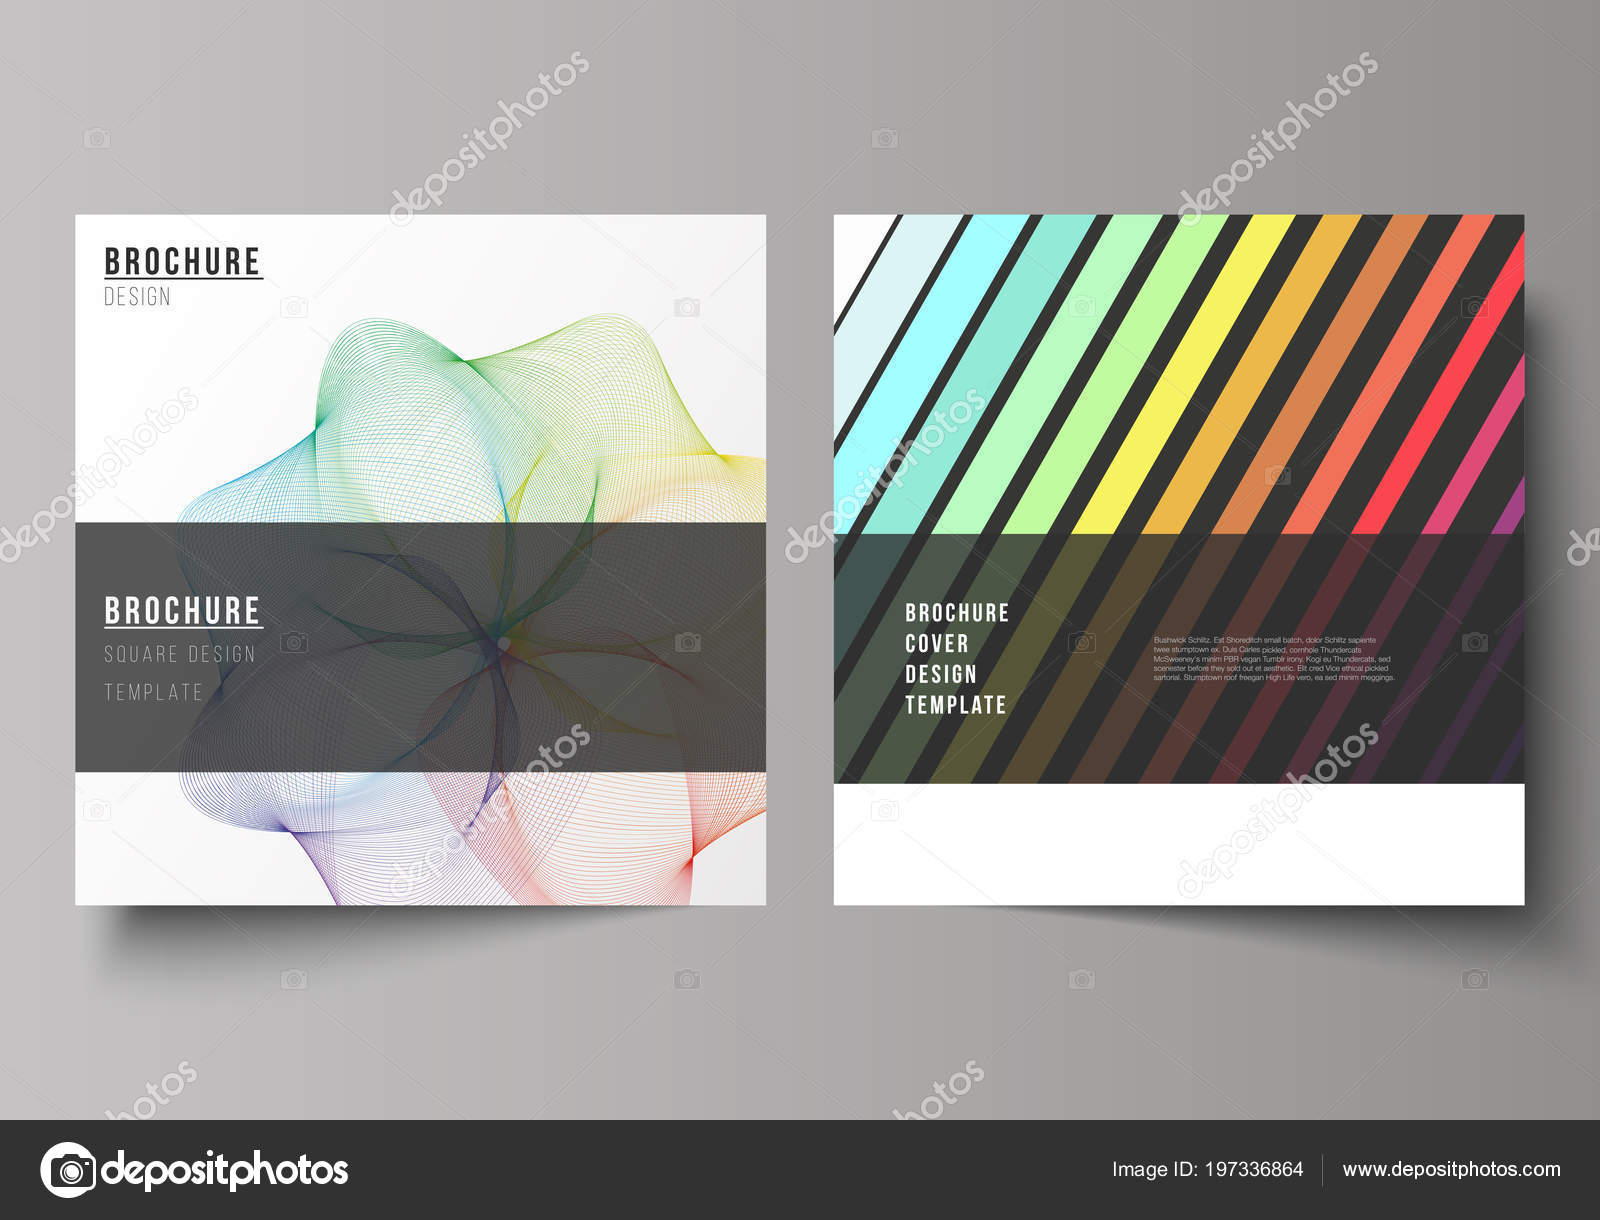 Minimal Vector Illustration Of Editable Layout Of Two Square Format Covers Design Templates For Brochure Flyer Magazine Abstract Colorful Geometric Backgrounds In Minimalistic Design To Choose From Stock Vector C Raevsky